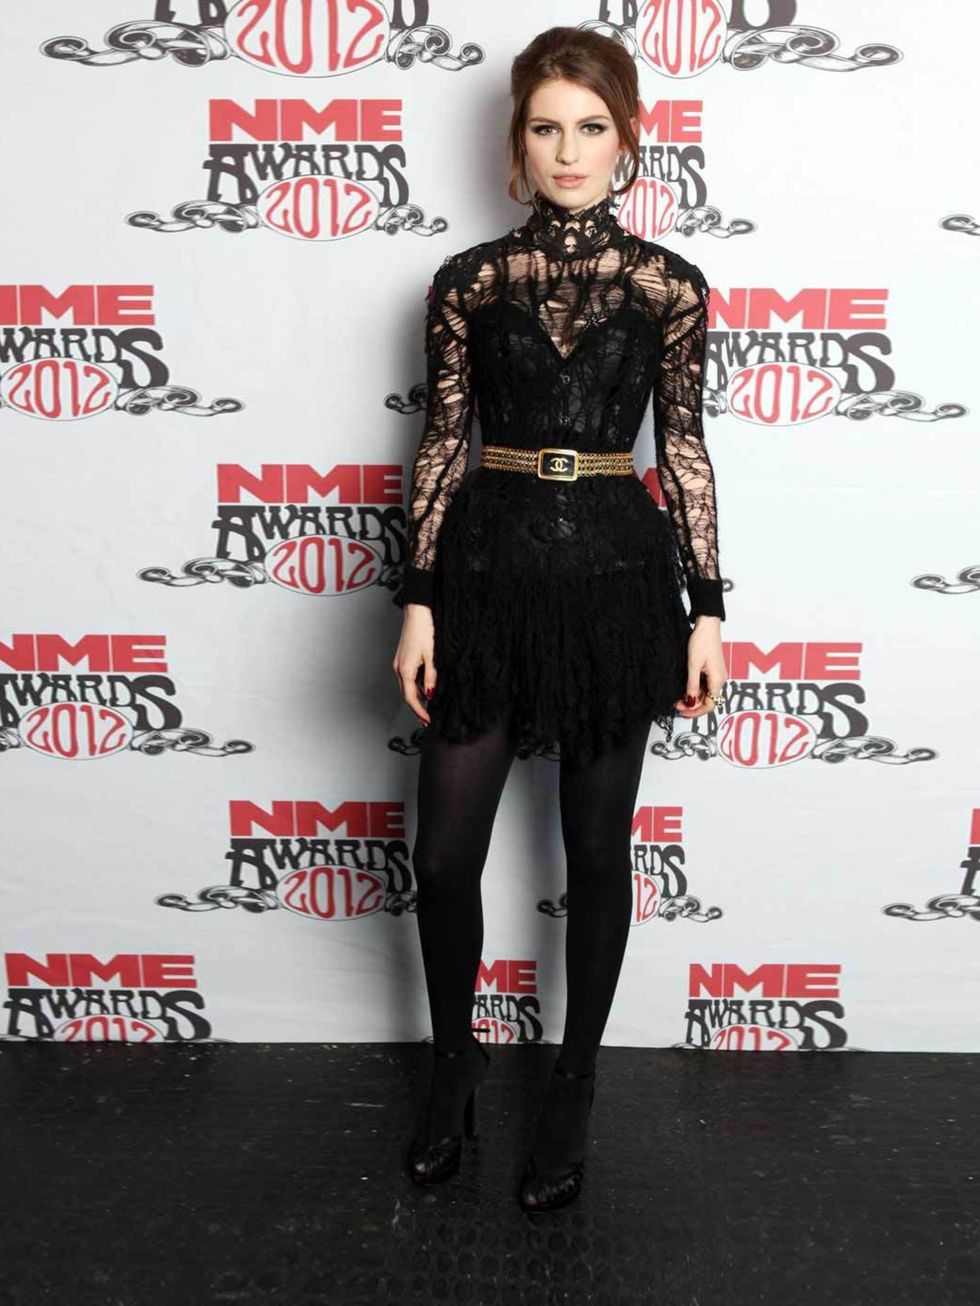 <p><a href="http://www.elleuk.com/content/search?SearchText=Tali+Lennox&amp;SearchButto">Tali Lennox</a> at the NME Awards 2012</p>